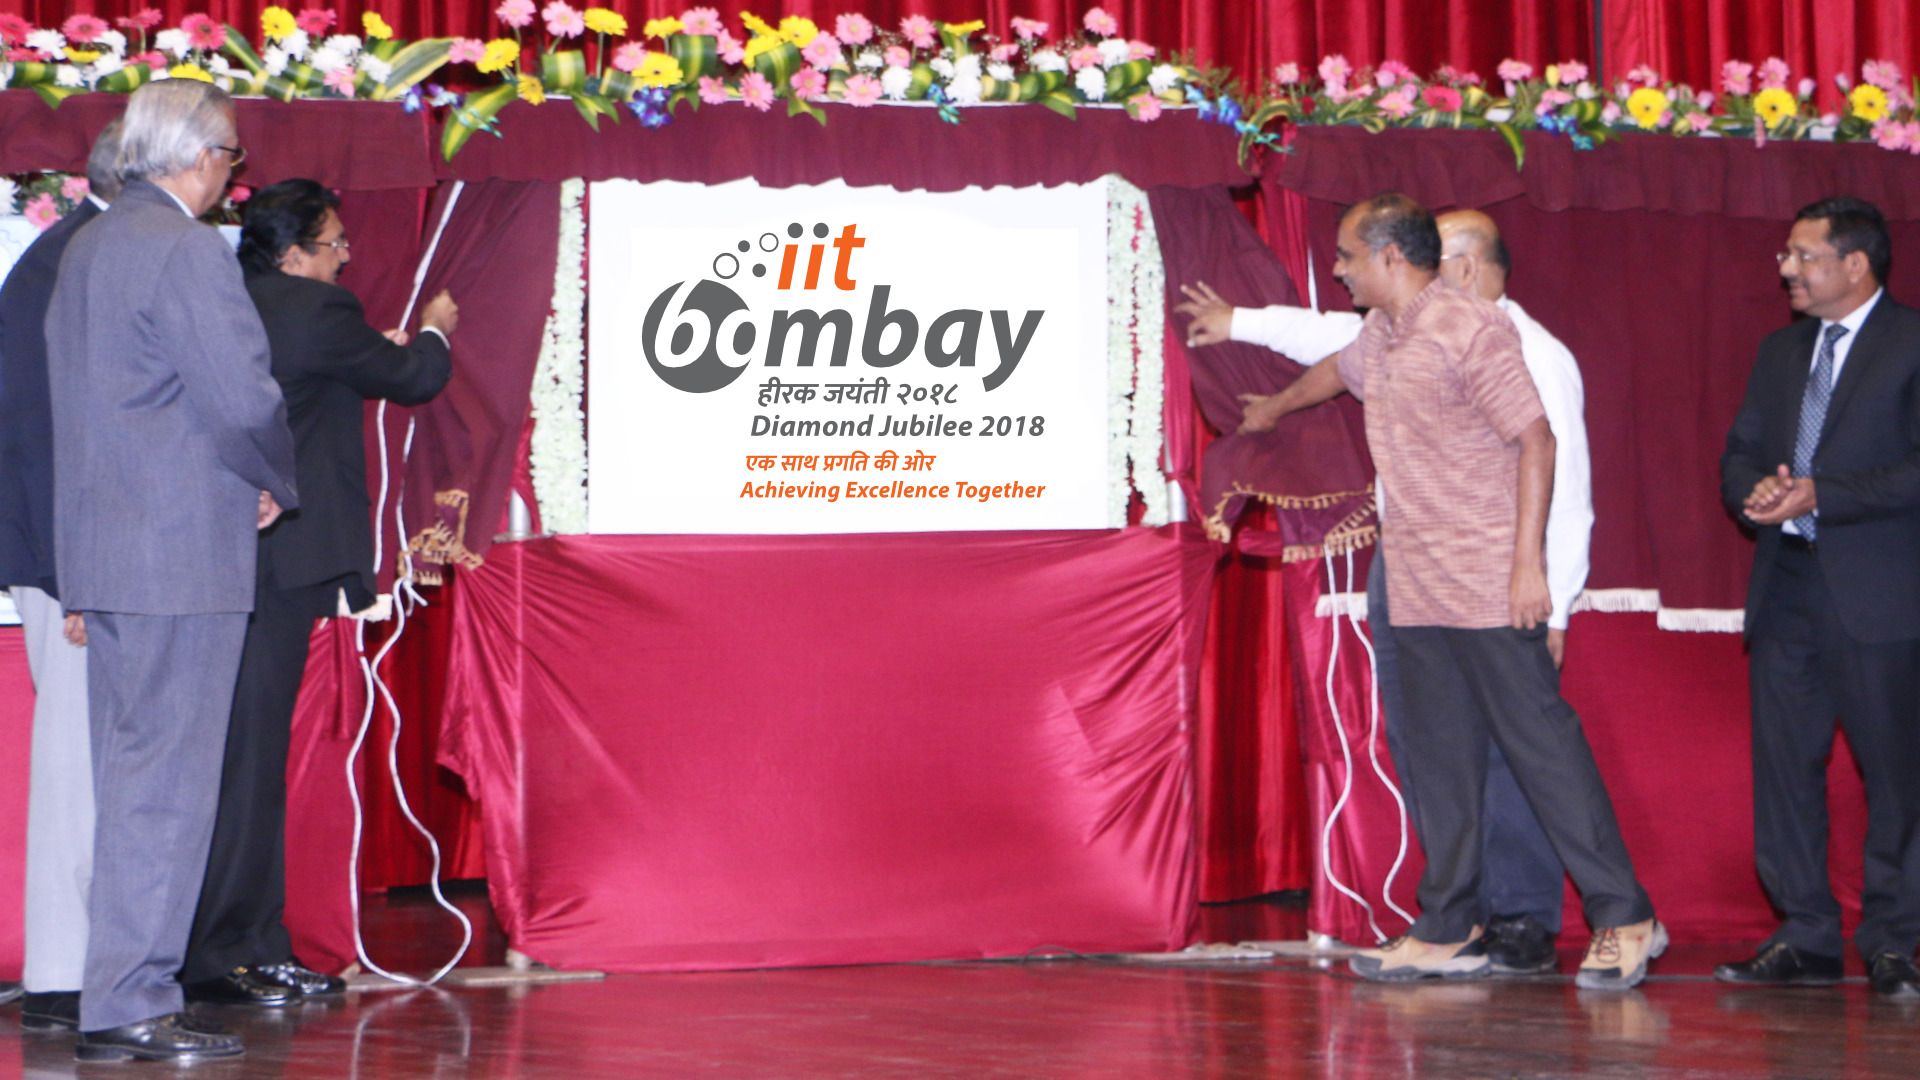 Diamond Jubilee logo being unveiled by Honourable Governor of Maharashtra Shri CH. Vidyasagar Rao on the occasion of 59th Foundation Day of Indian Institute of Technology Bombay (IIT Bombay)